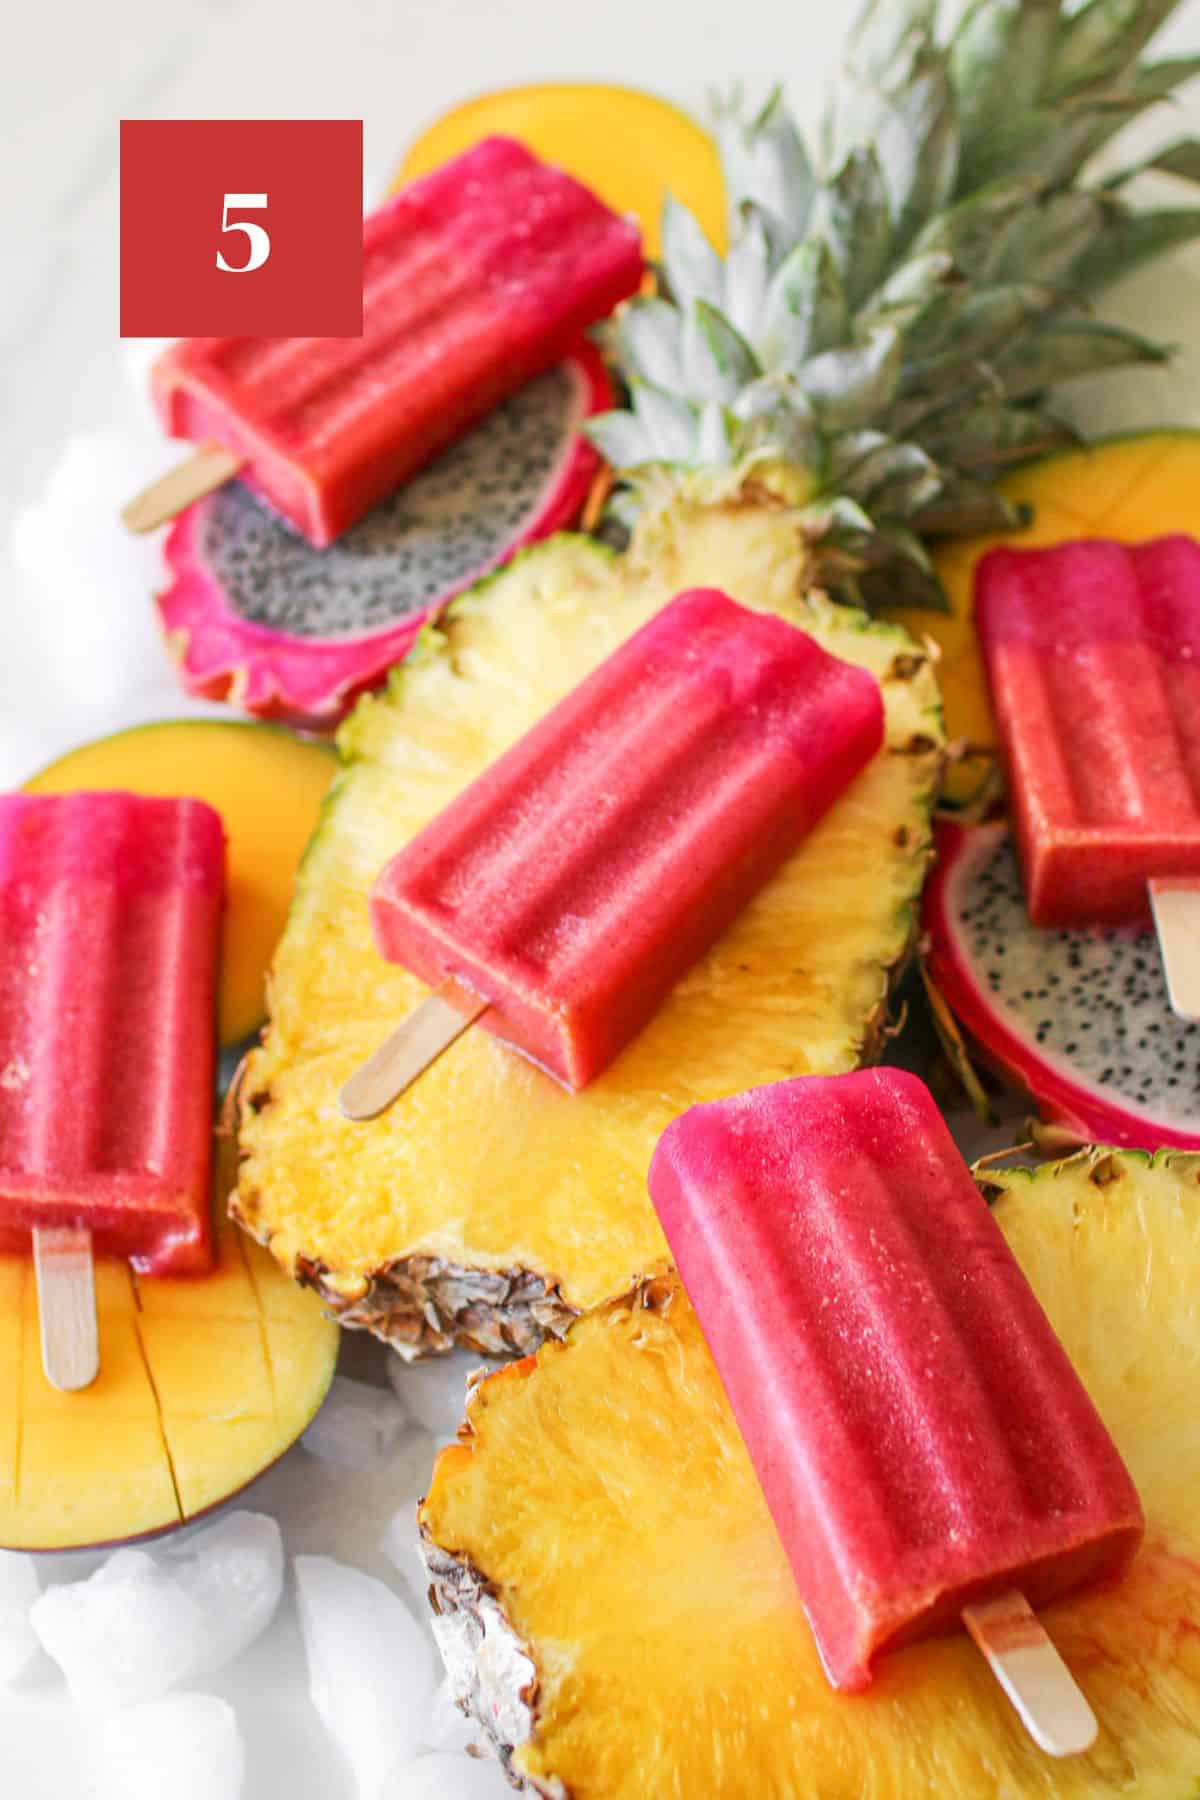 Angled view of Tropical Popsicles on a variety of sliced tropical fruit - pineapple, mango and dragon fruit with crushed ice surrounding the fruit on a white background. In the upper left corner is a dark red square with a white '5' in the center.